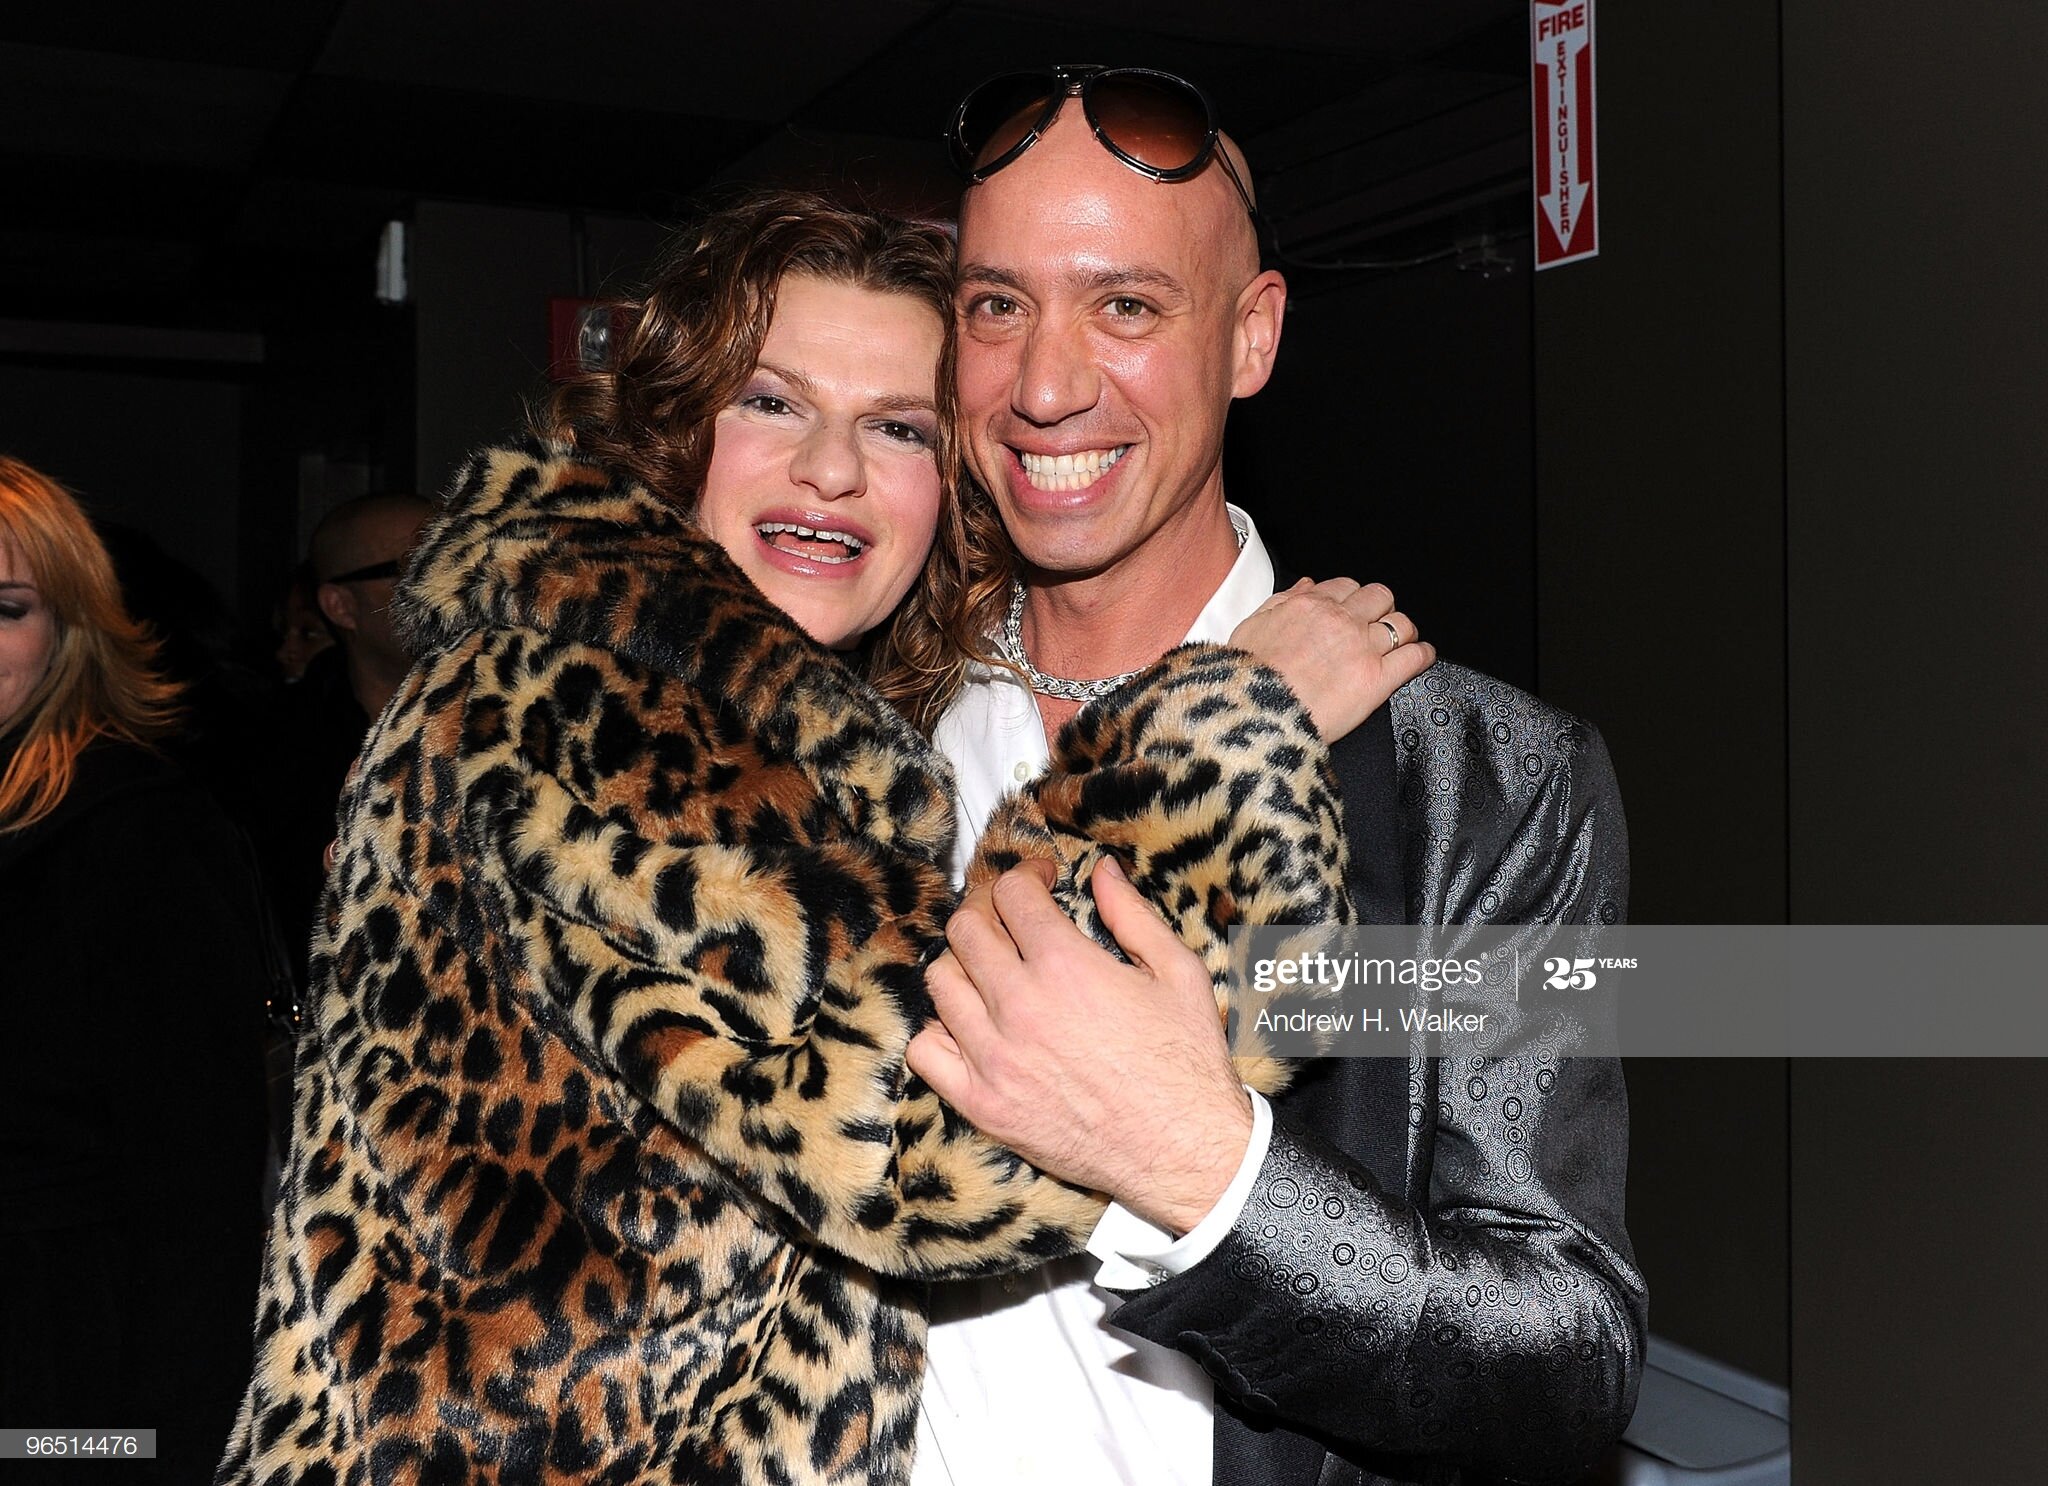  NEW YORK - FEBRUARY 08: Sandra Bernhard and Robert Verdi attend the premiere screening of "The Robert Verdi Show Starring Robert Verdi" at the SVA Theater on February 8, 2010 in New York City.  (Photo by Andrew H. Walker/Getty Images) 